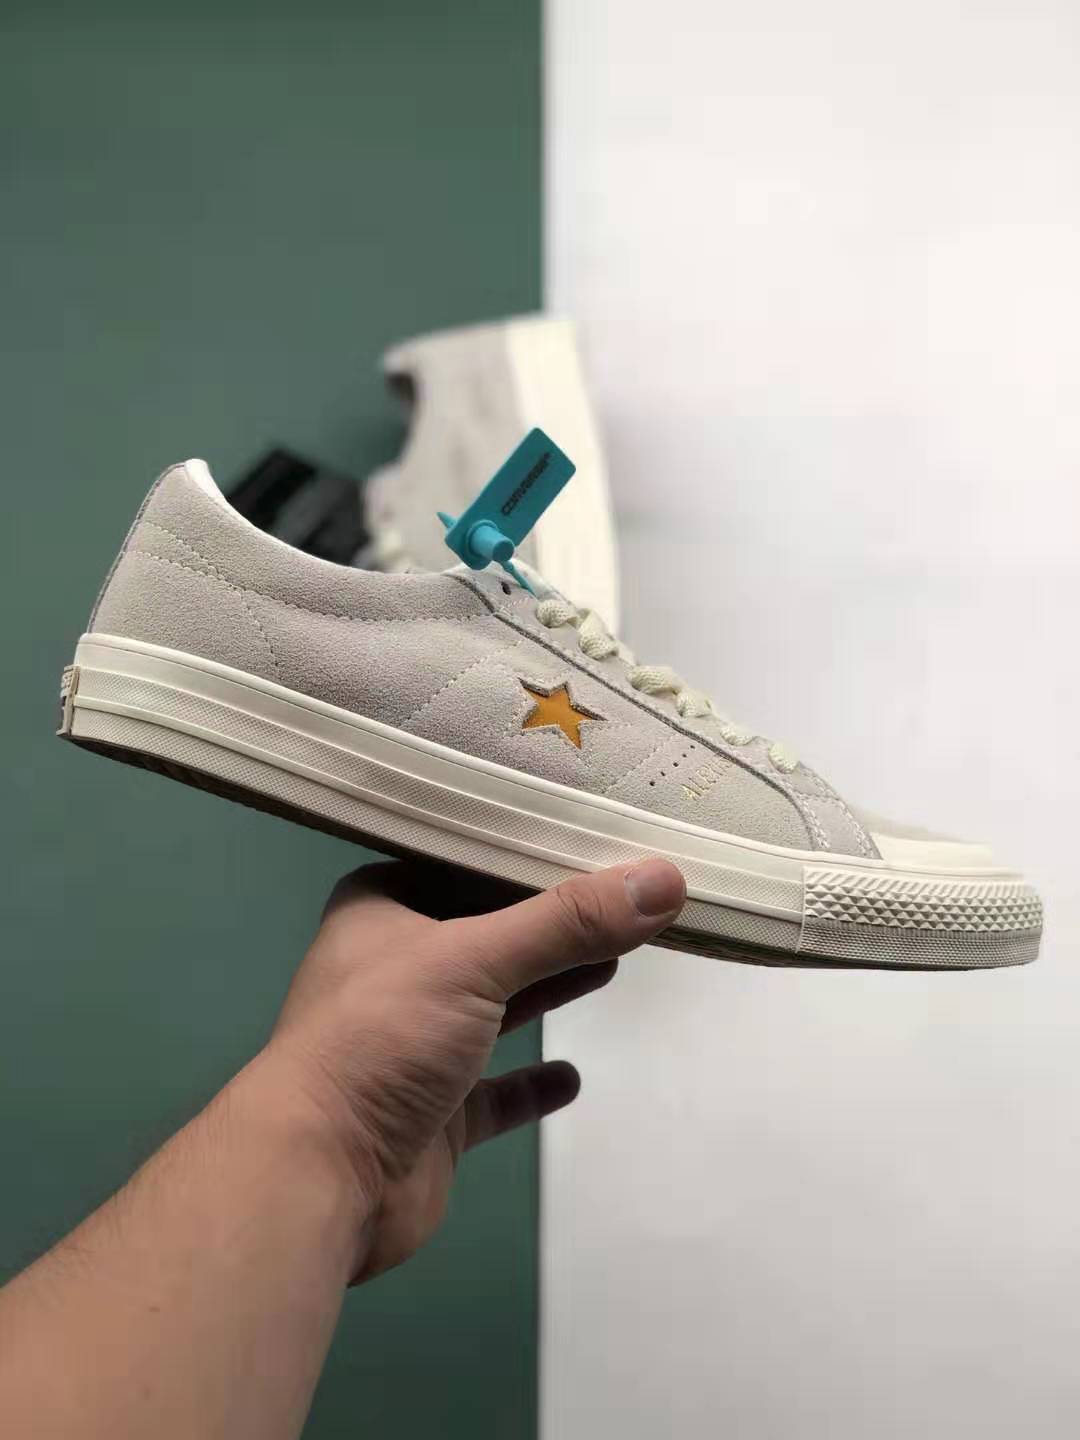 Converse Alexis Sablone x One Star Pro All Star 2 - Pale Putty Gold 166401C